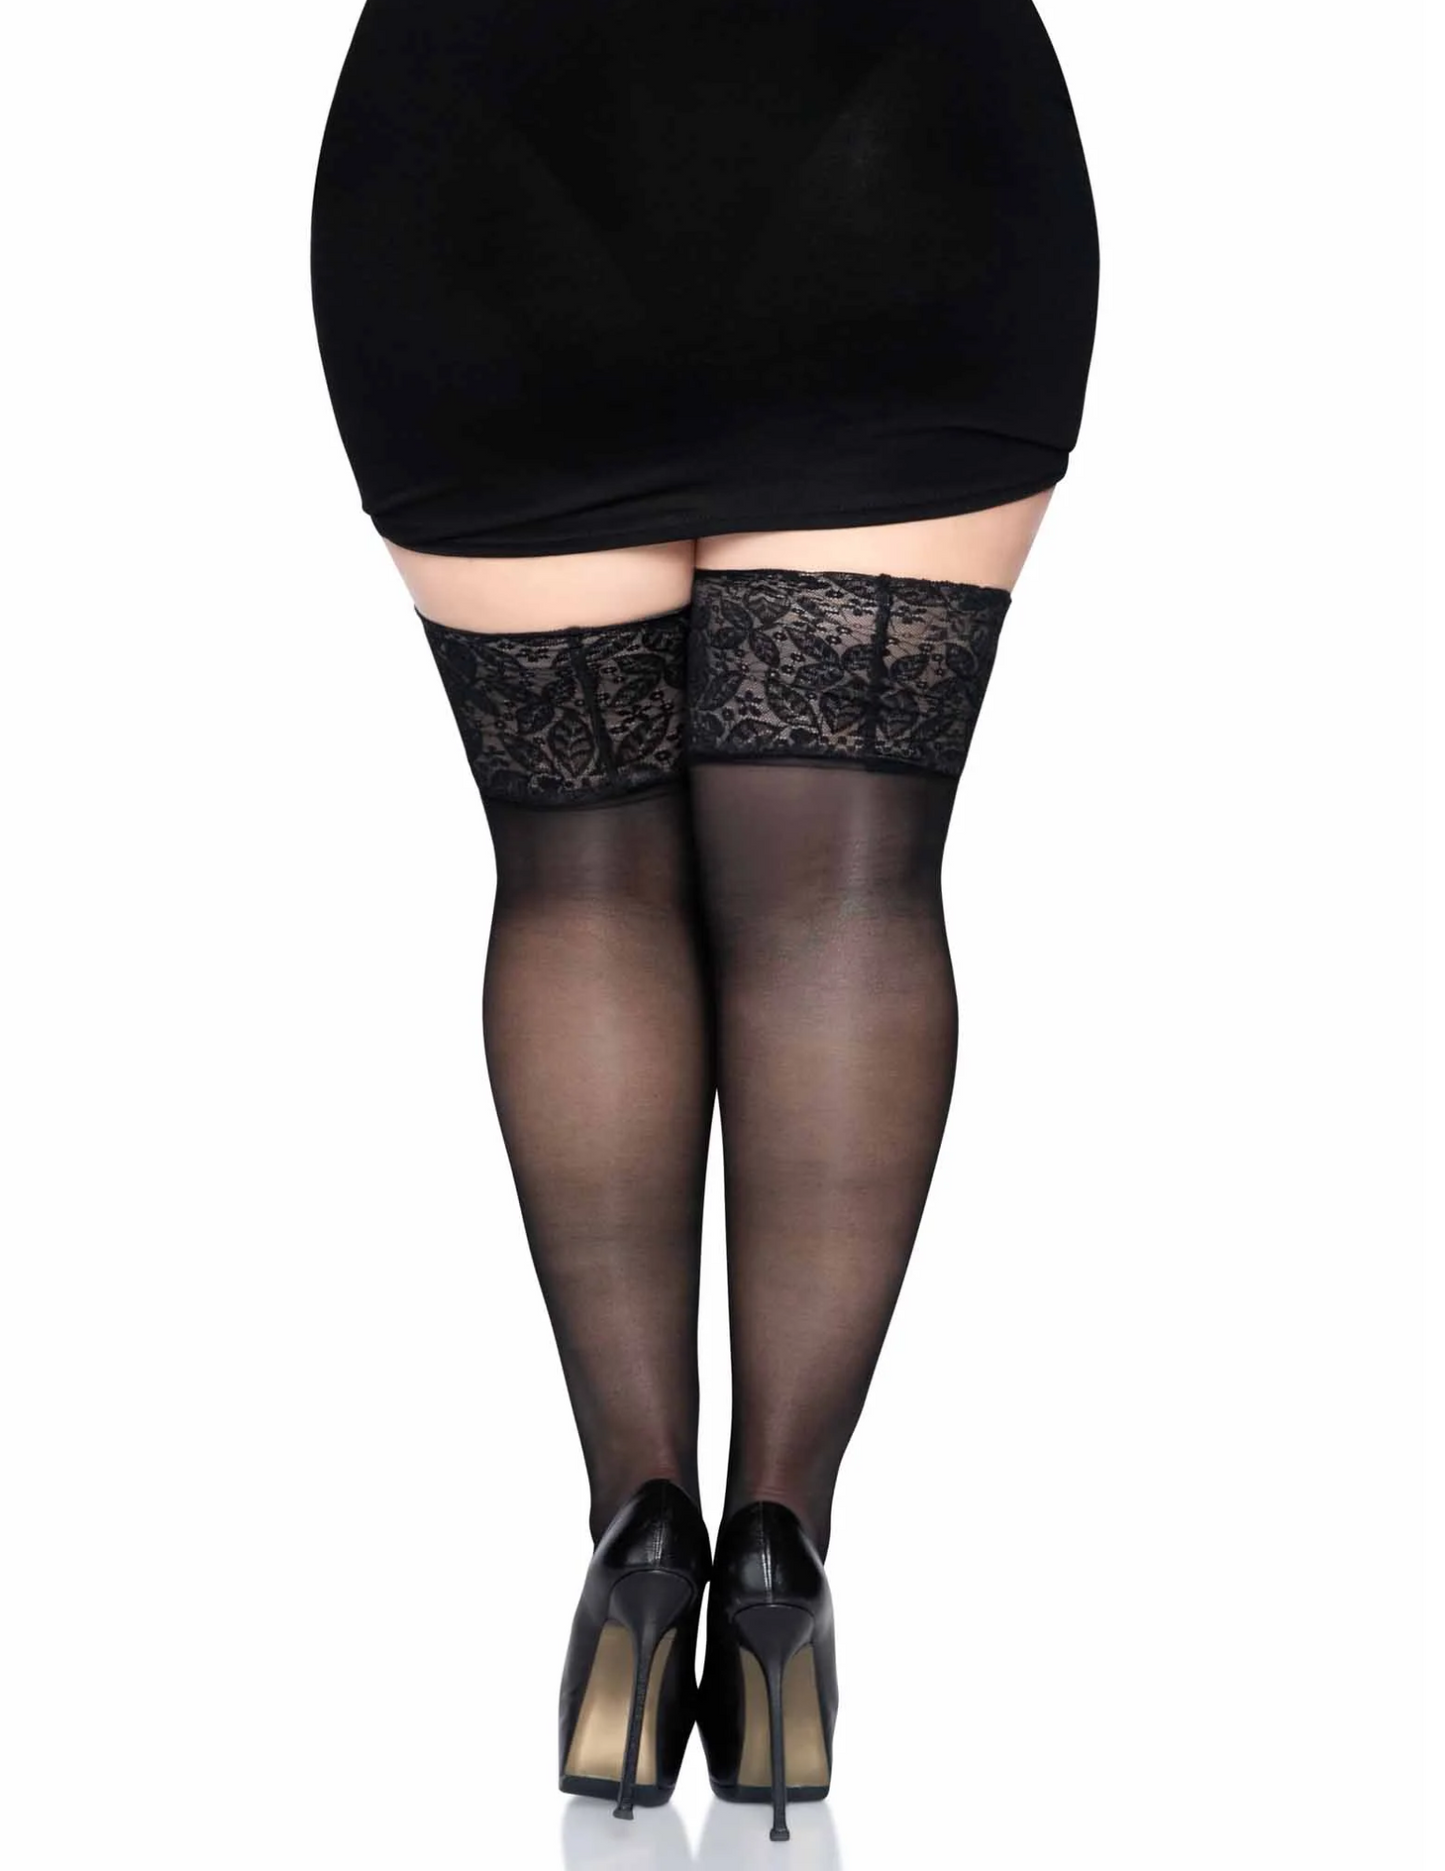 Leg Avenue queen size, sheer lycra silicone stay up lace top thigh highs. Full back view. Black.